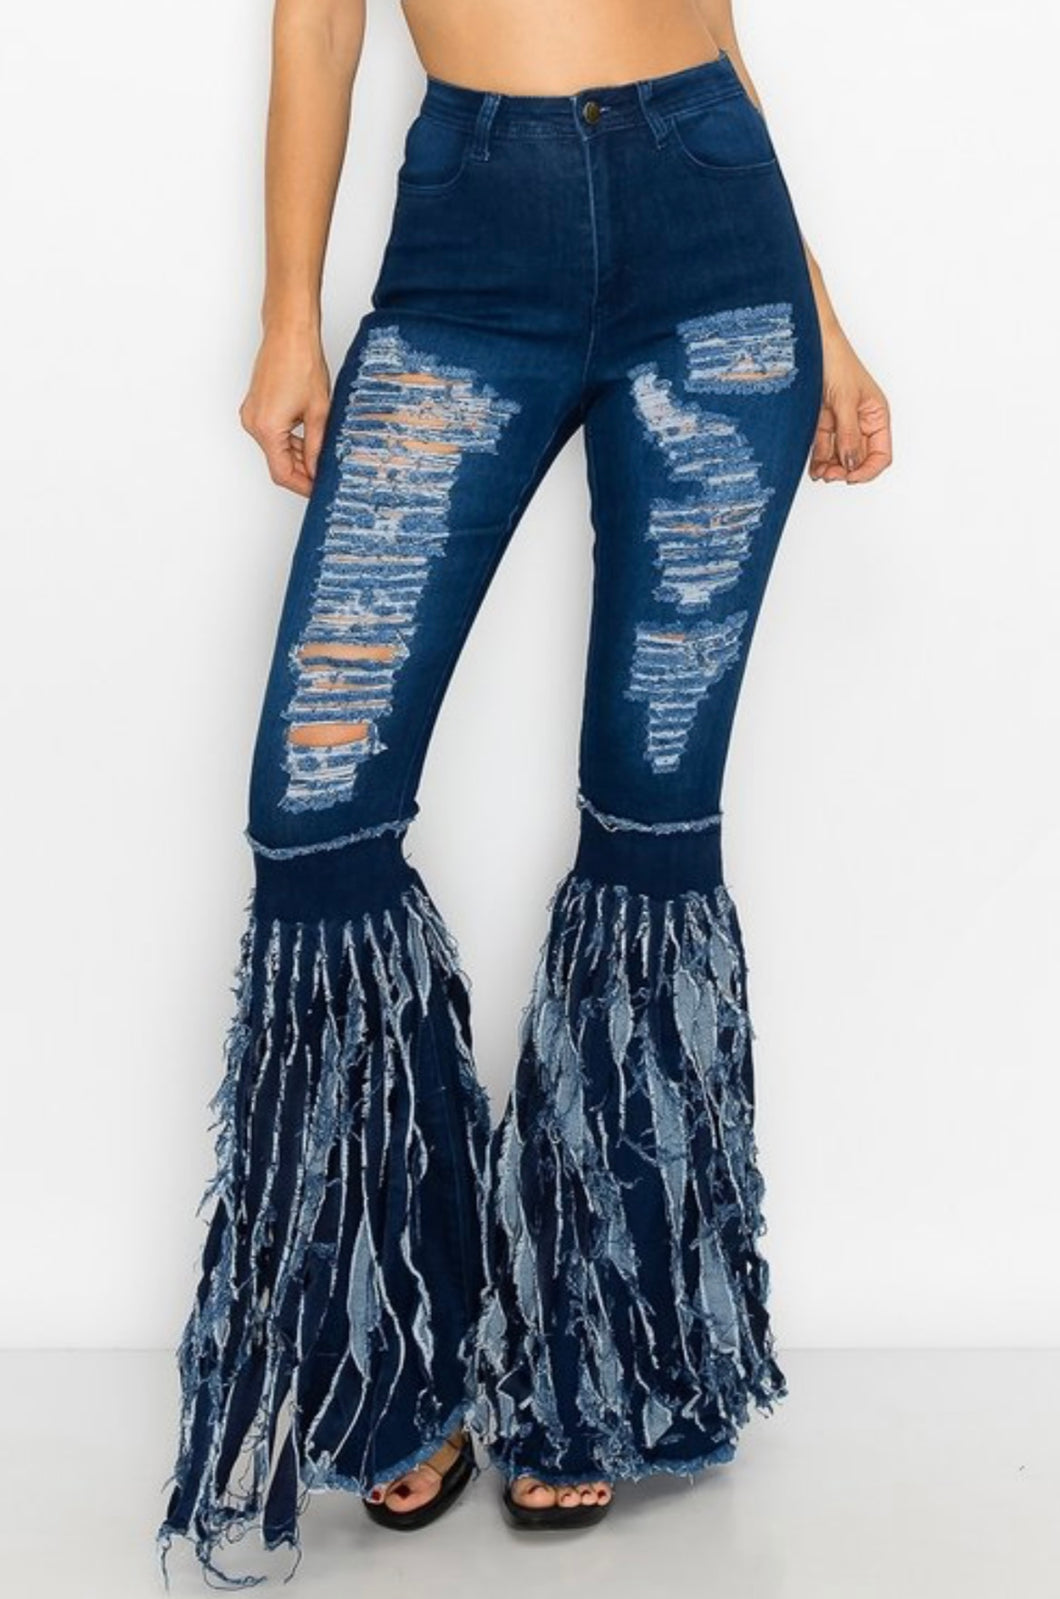 Fringed & Distressed Jeans